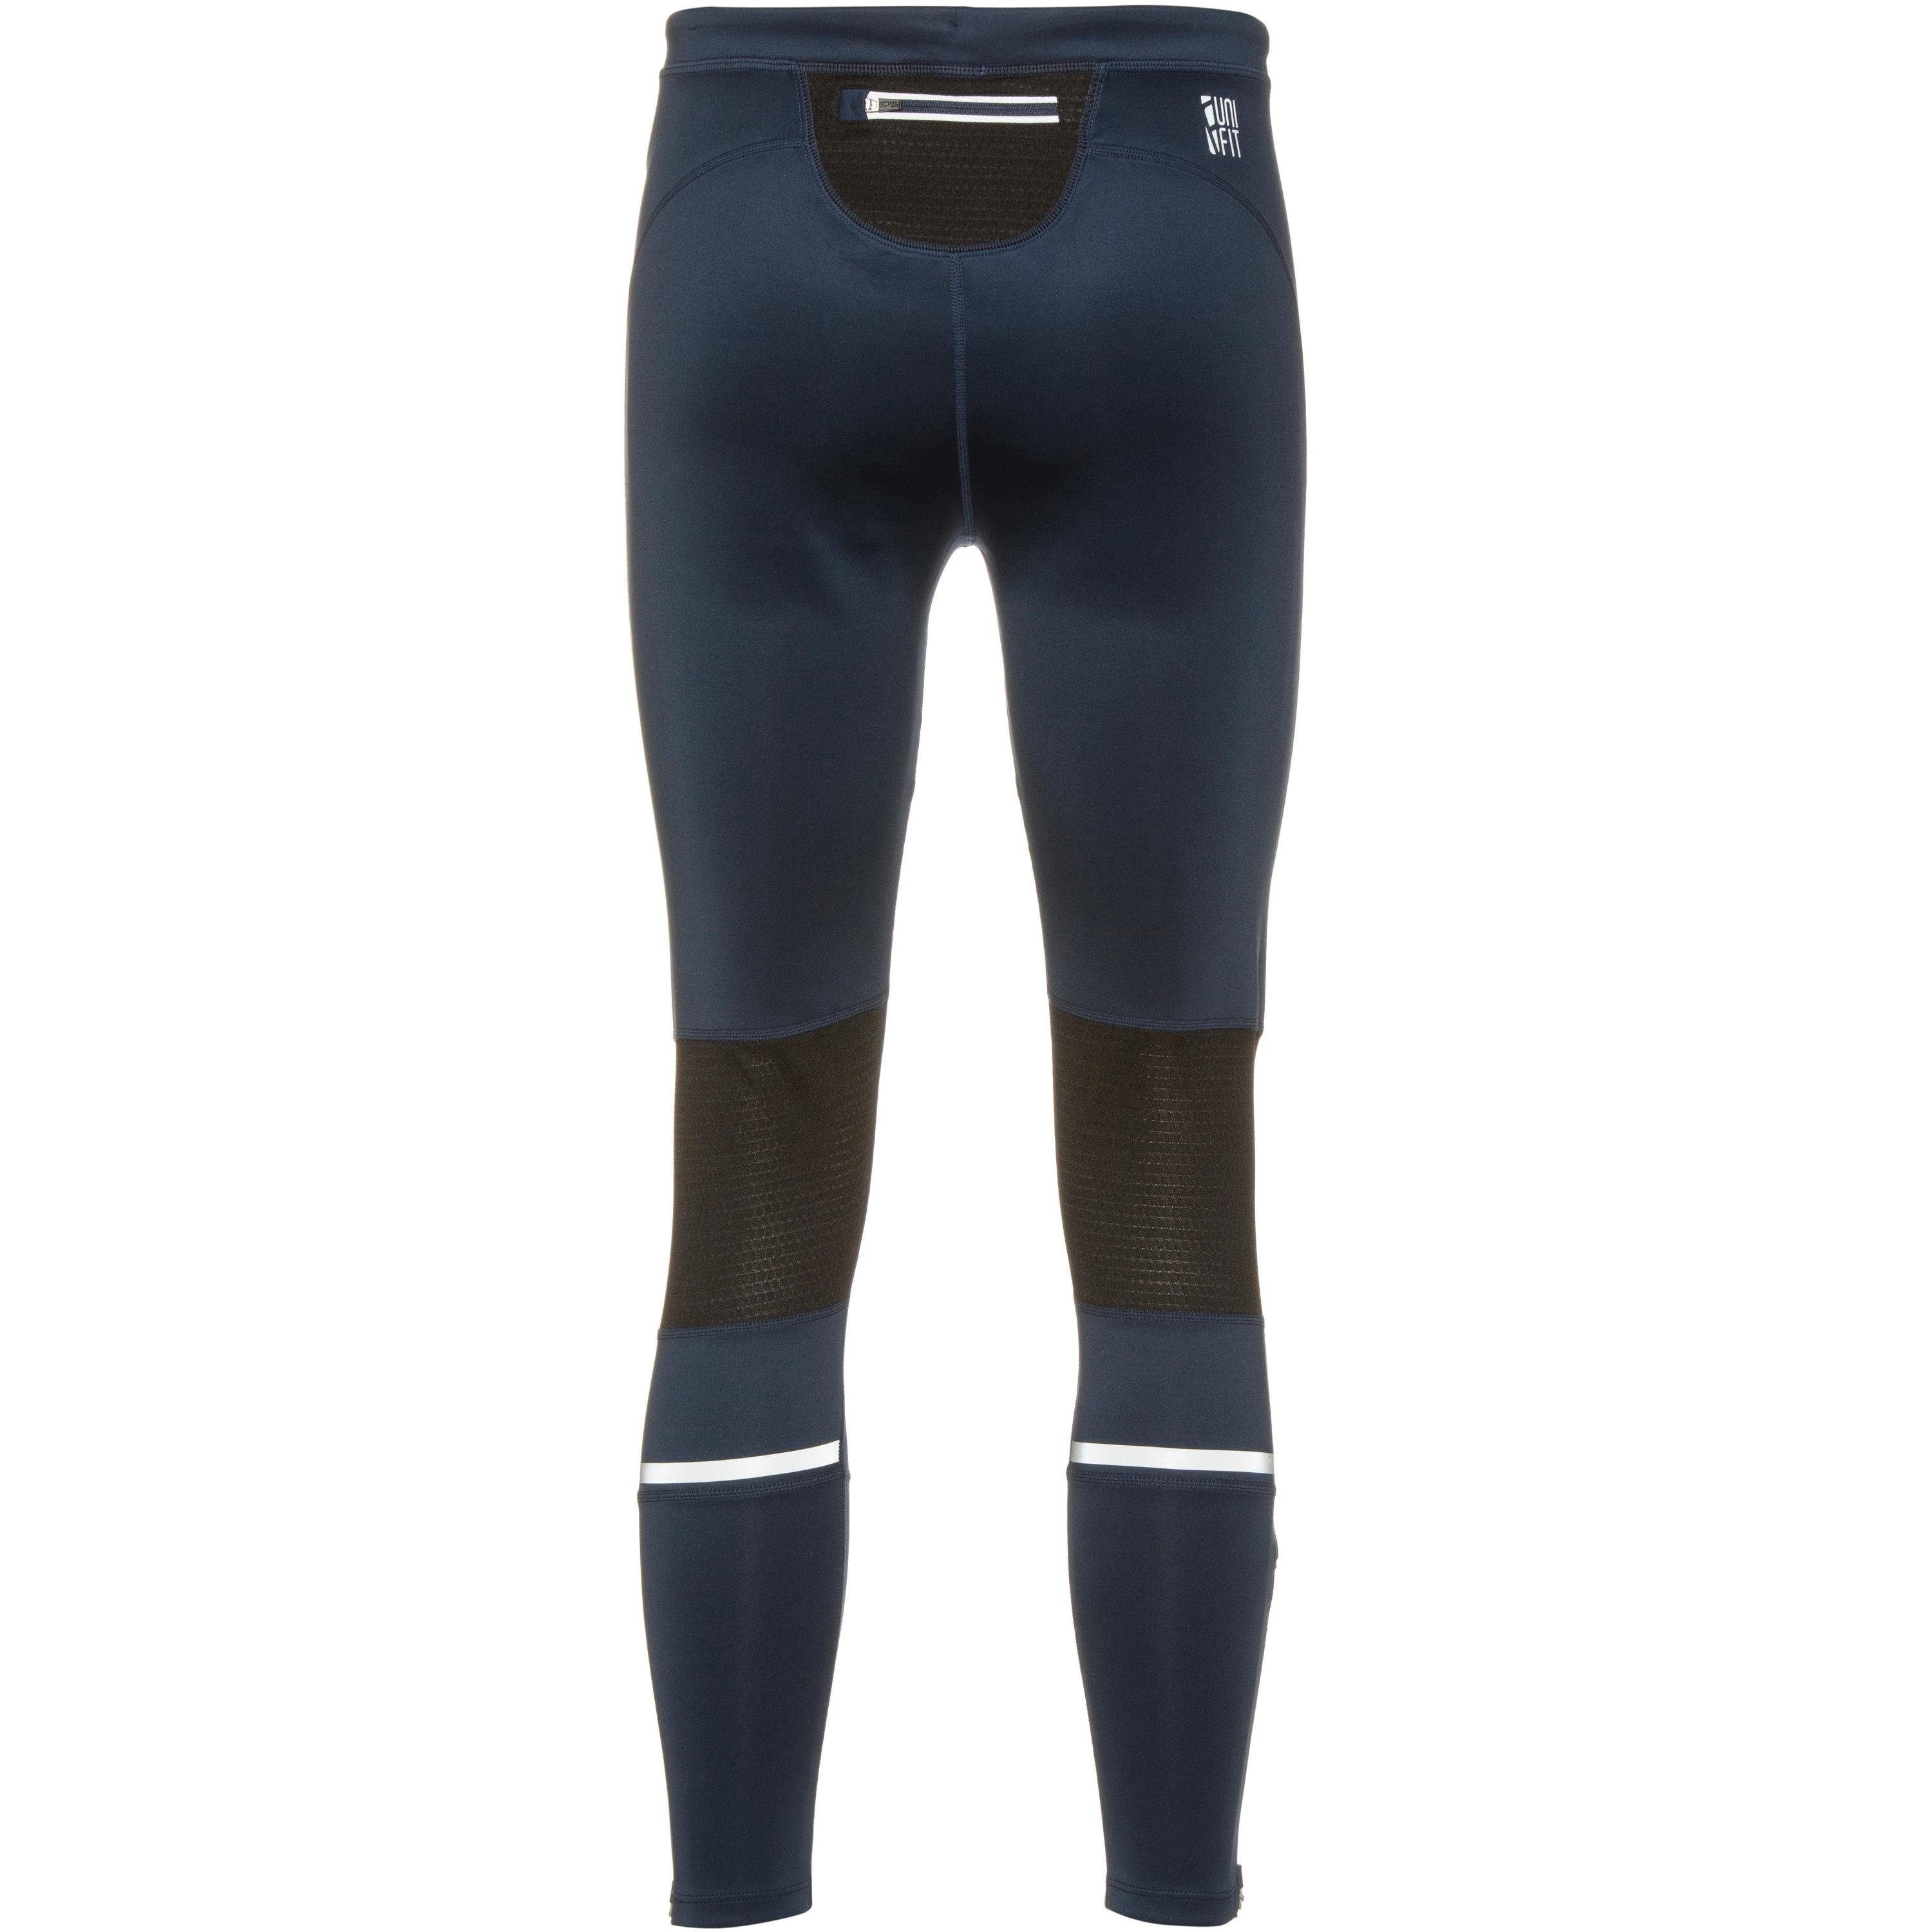 Lauftights naval unifit academy